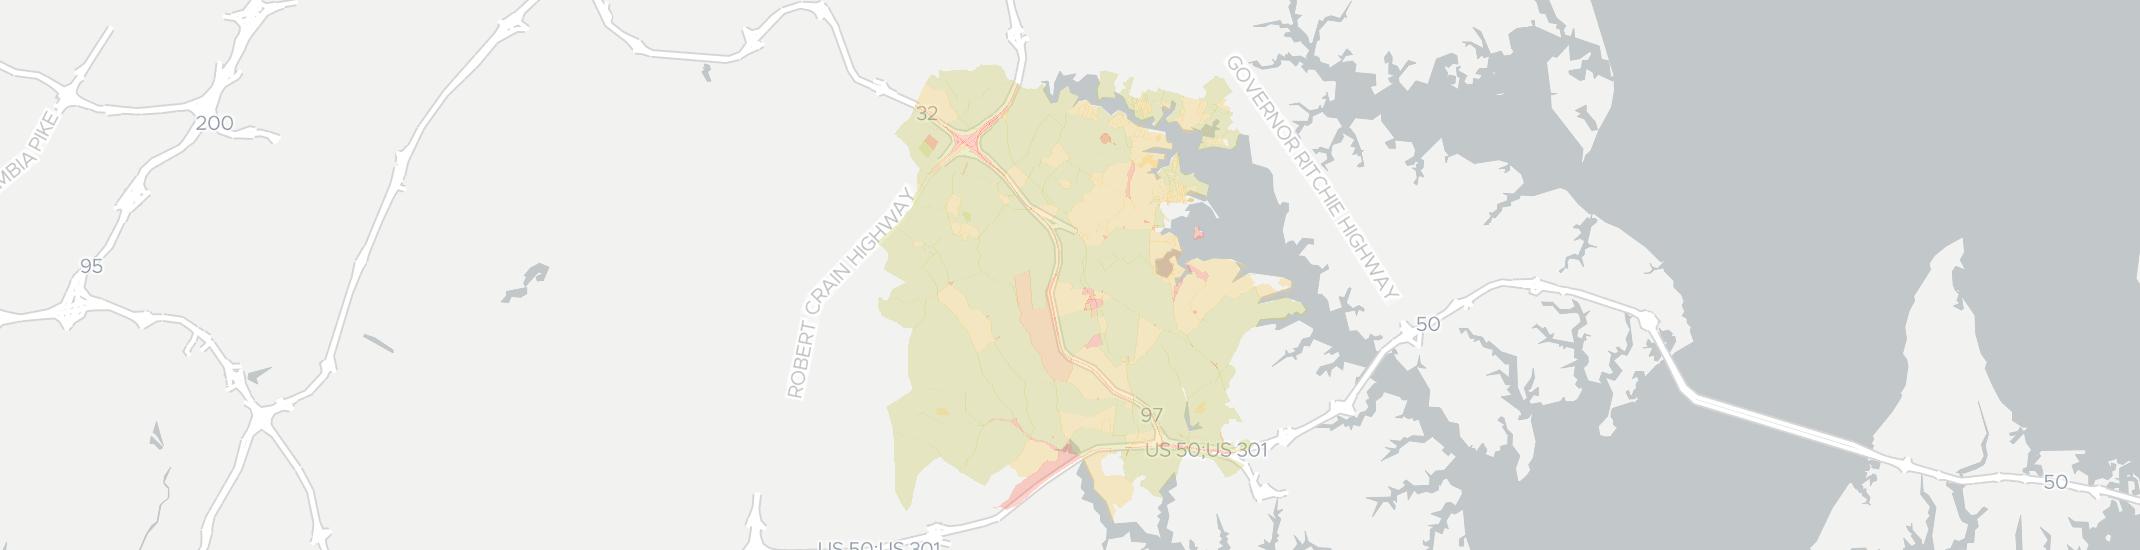 Crownsville Internet Competition Map. Click for interactive map.